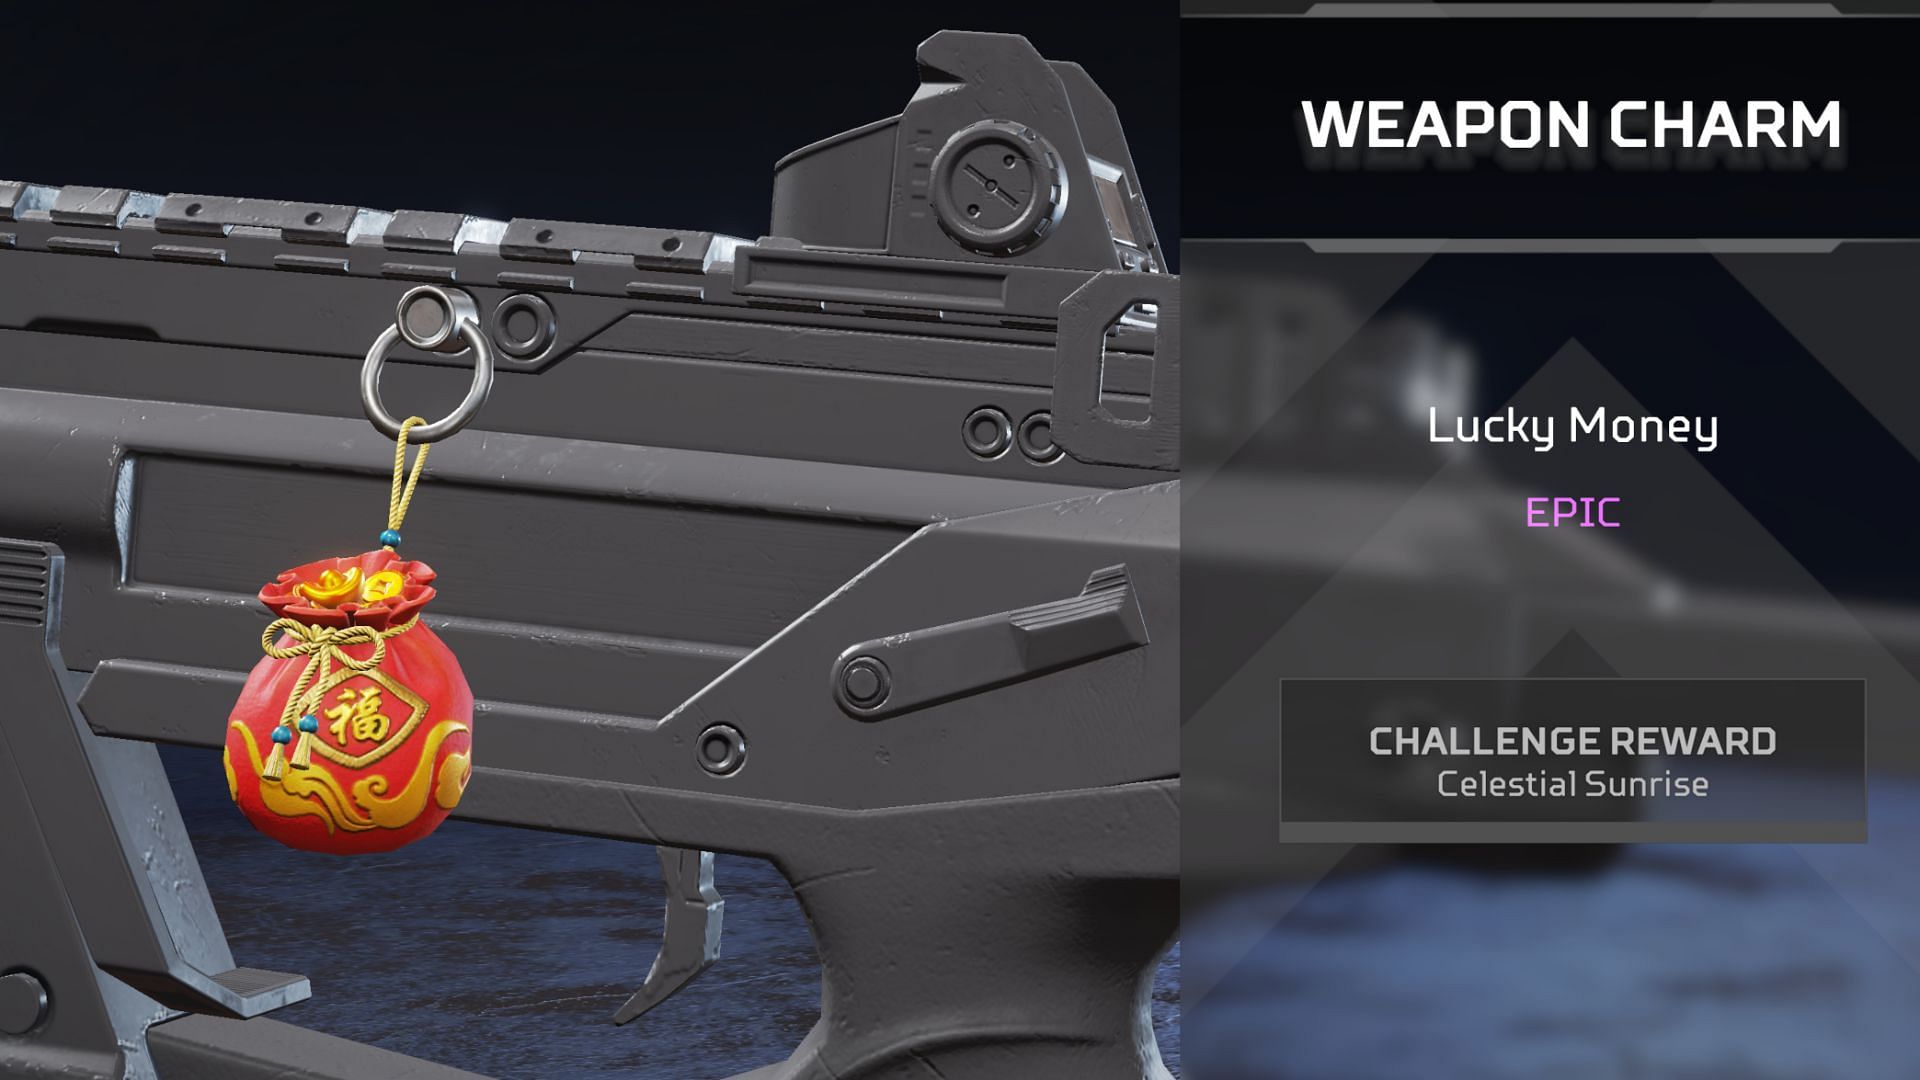 The Lucky Money Weapon Spell in Apex Legends (Image via EA)